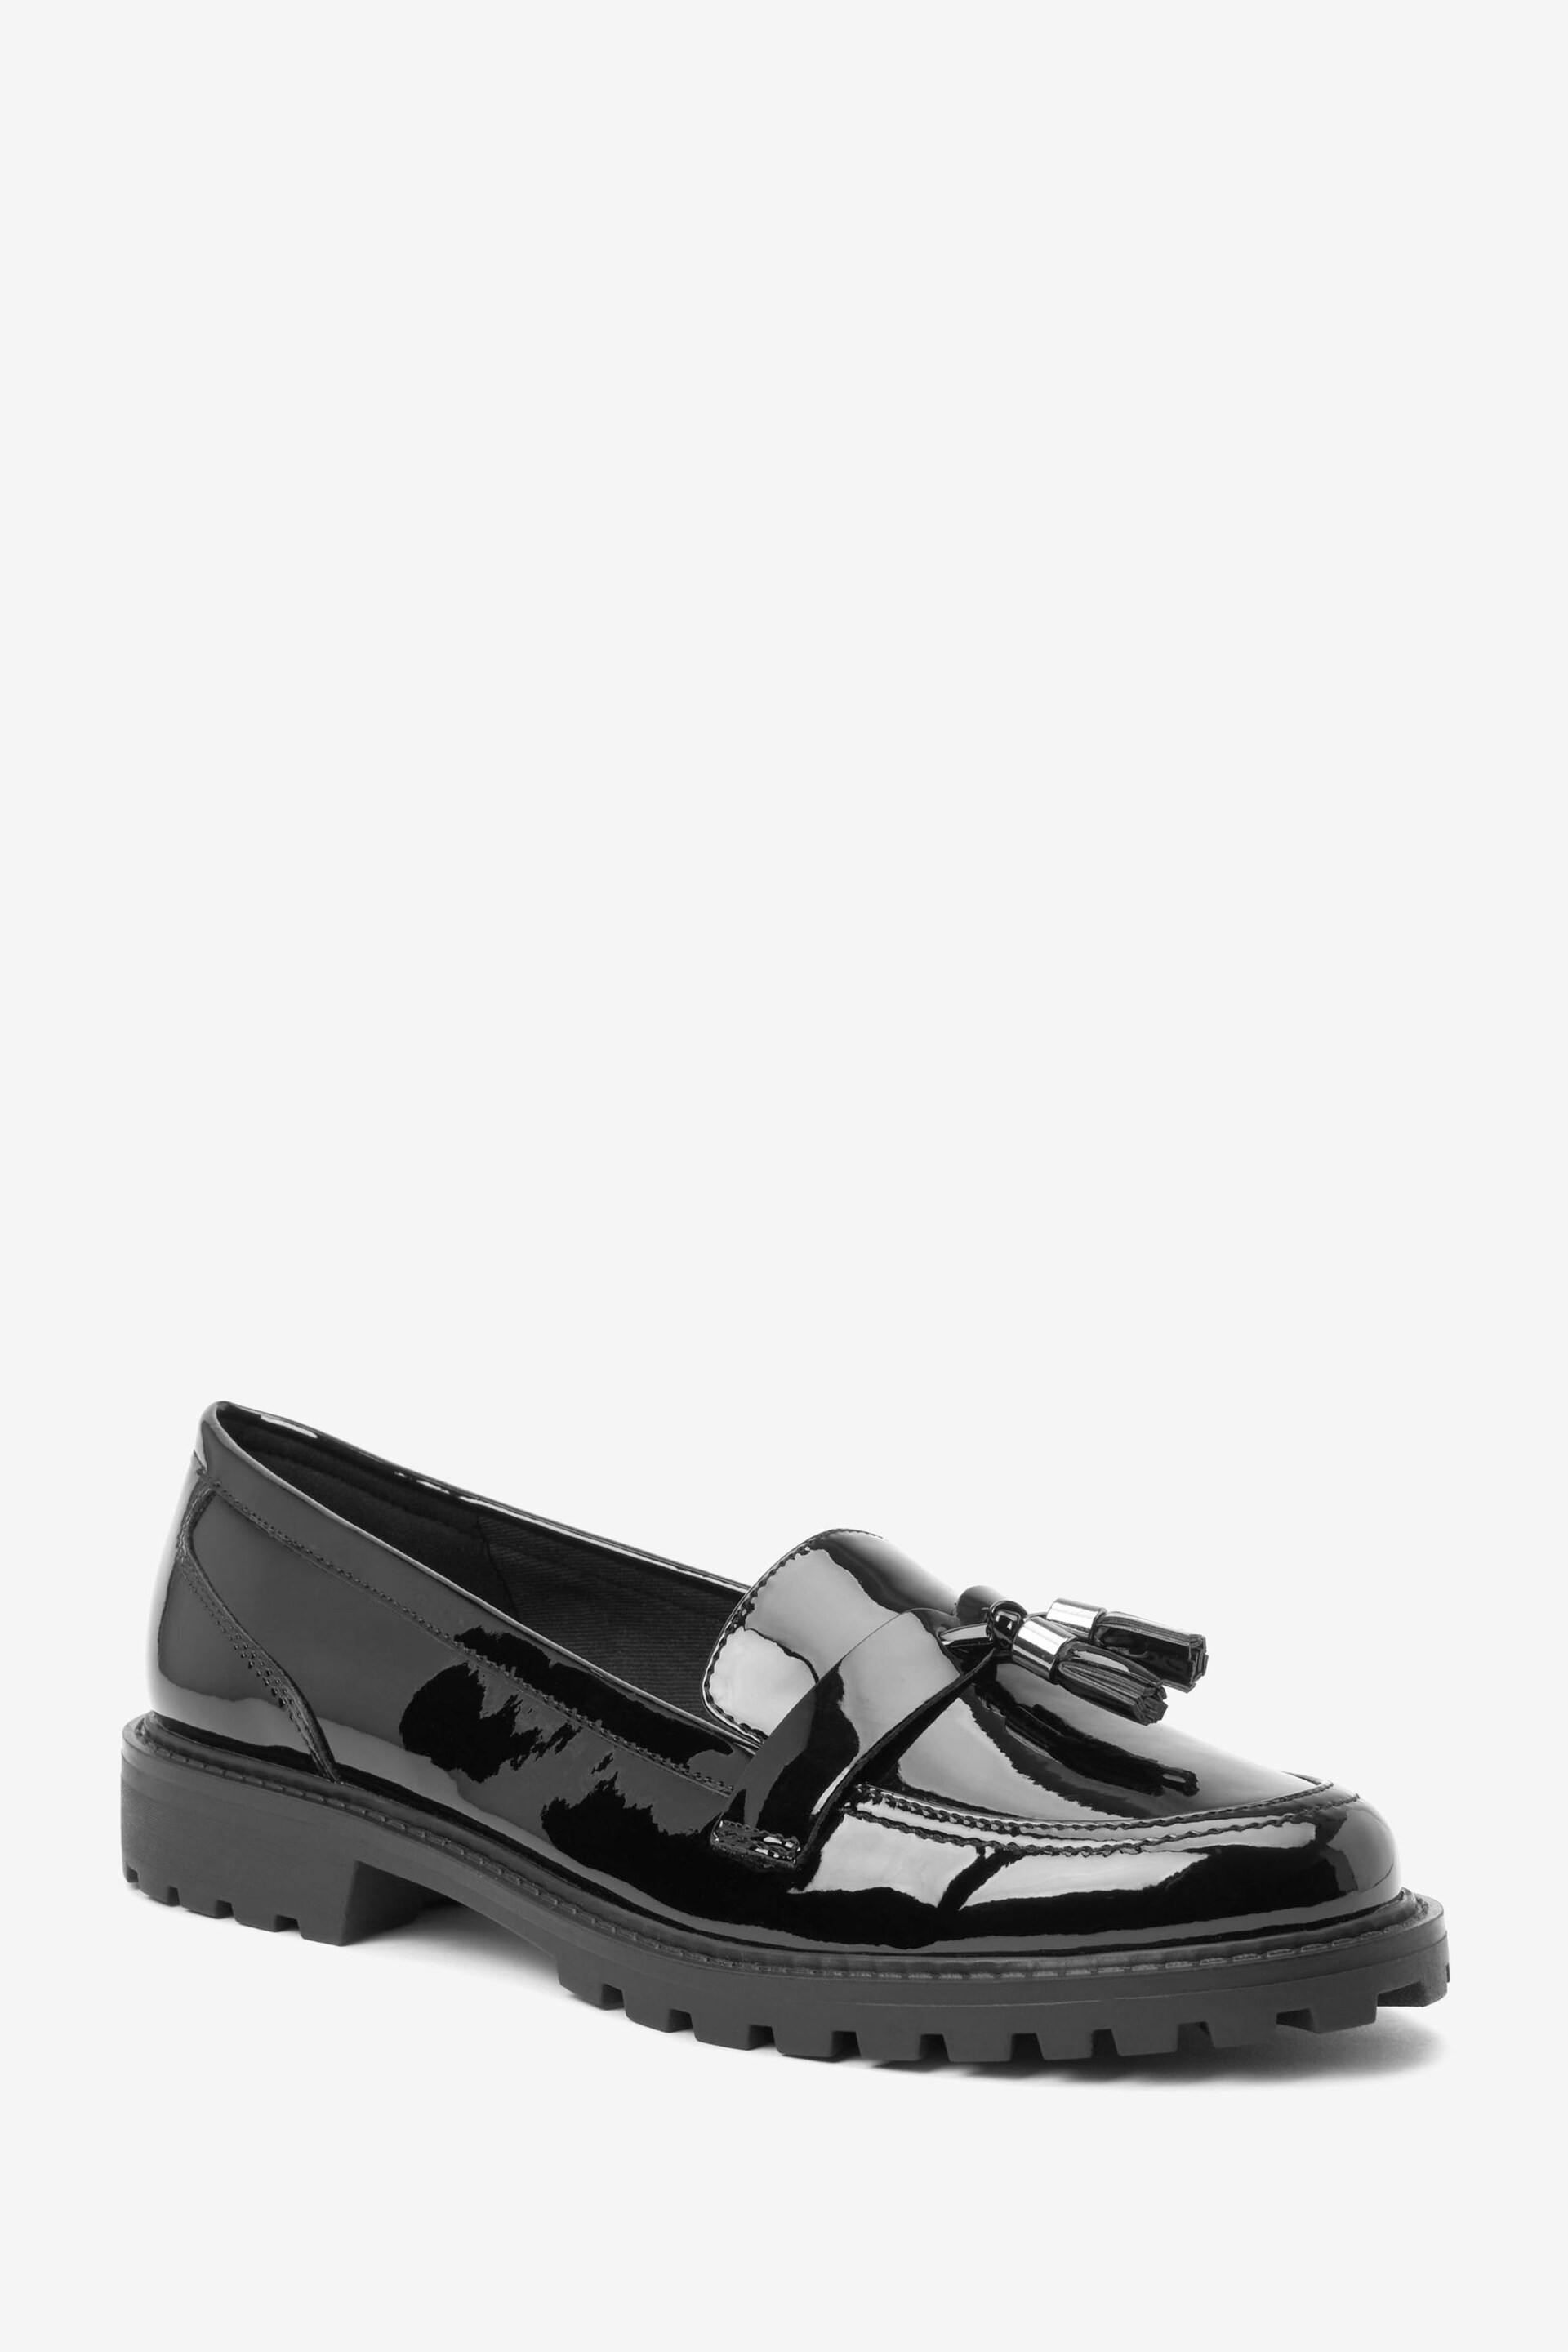 Black Patent Extra Wide Fit Forever Comfort® Tassel Detail Cleated Chunky Loafer Shoes - Image 4 of 6